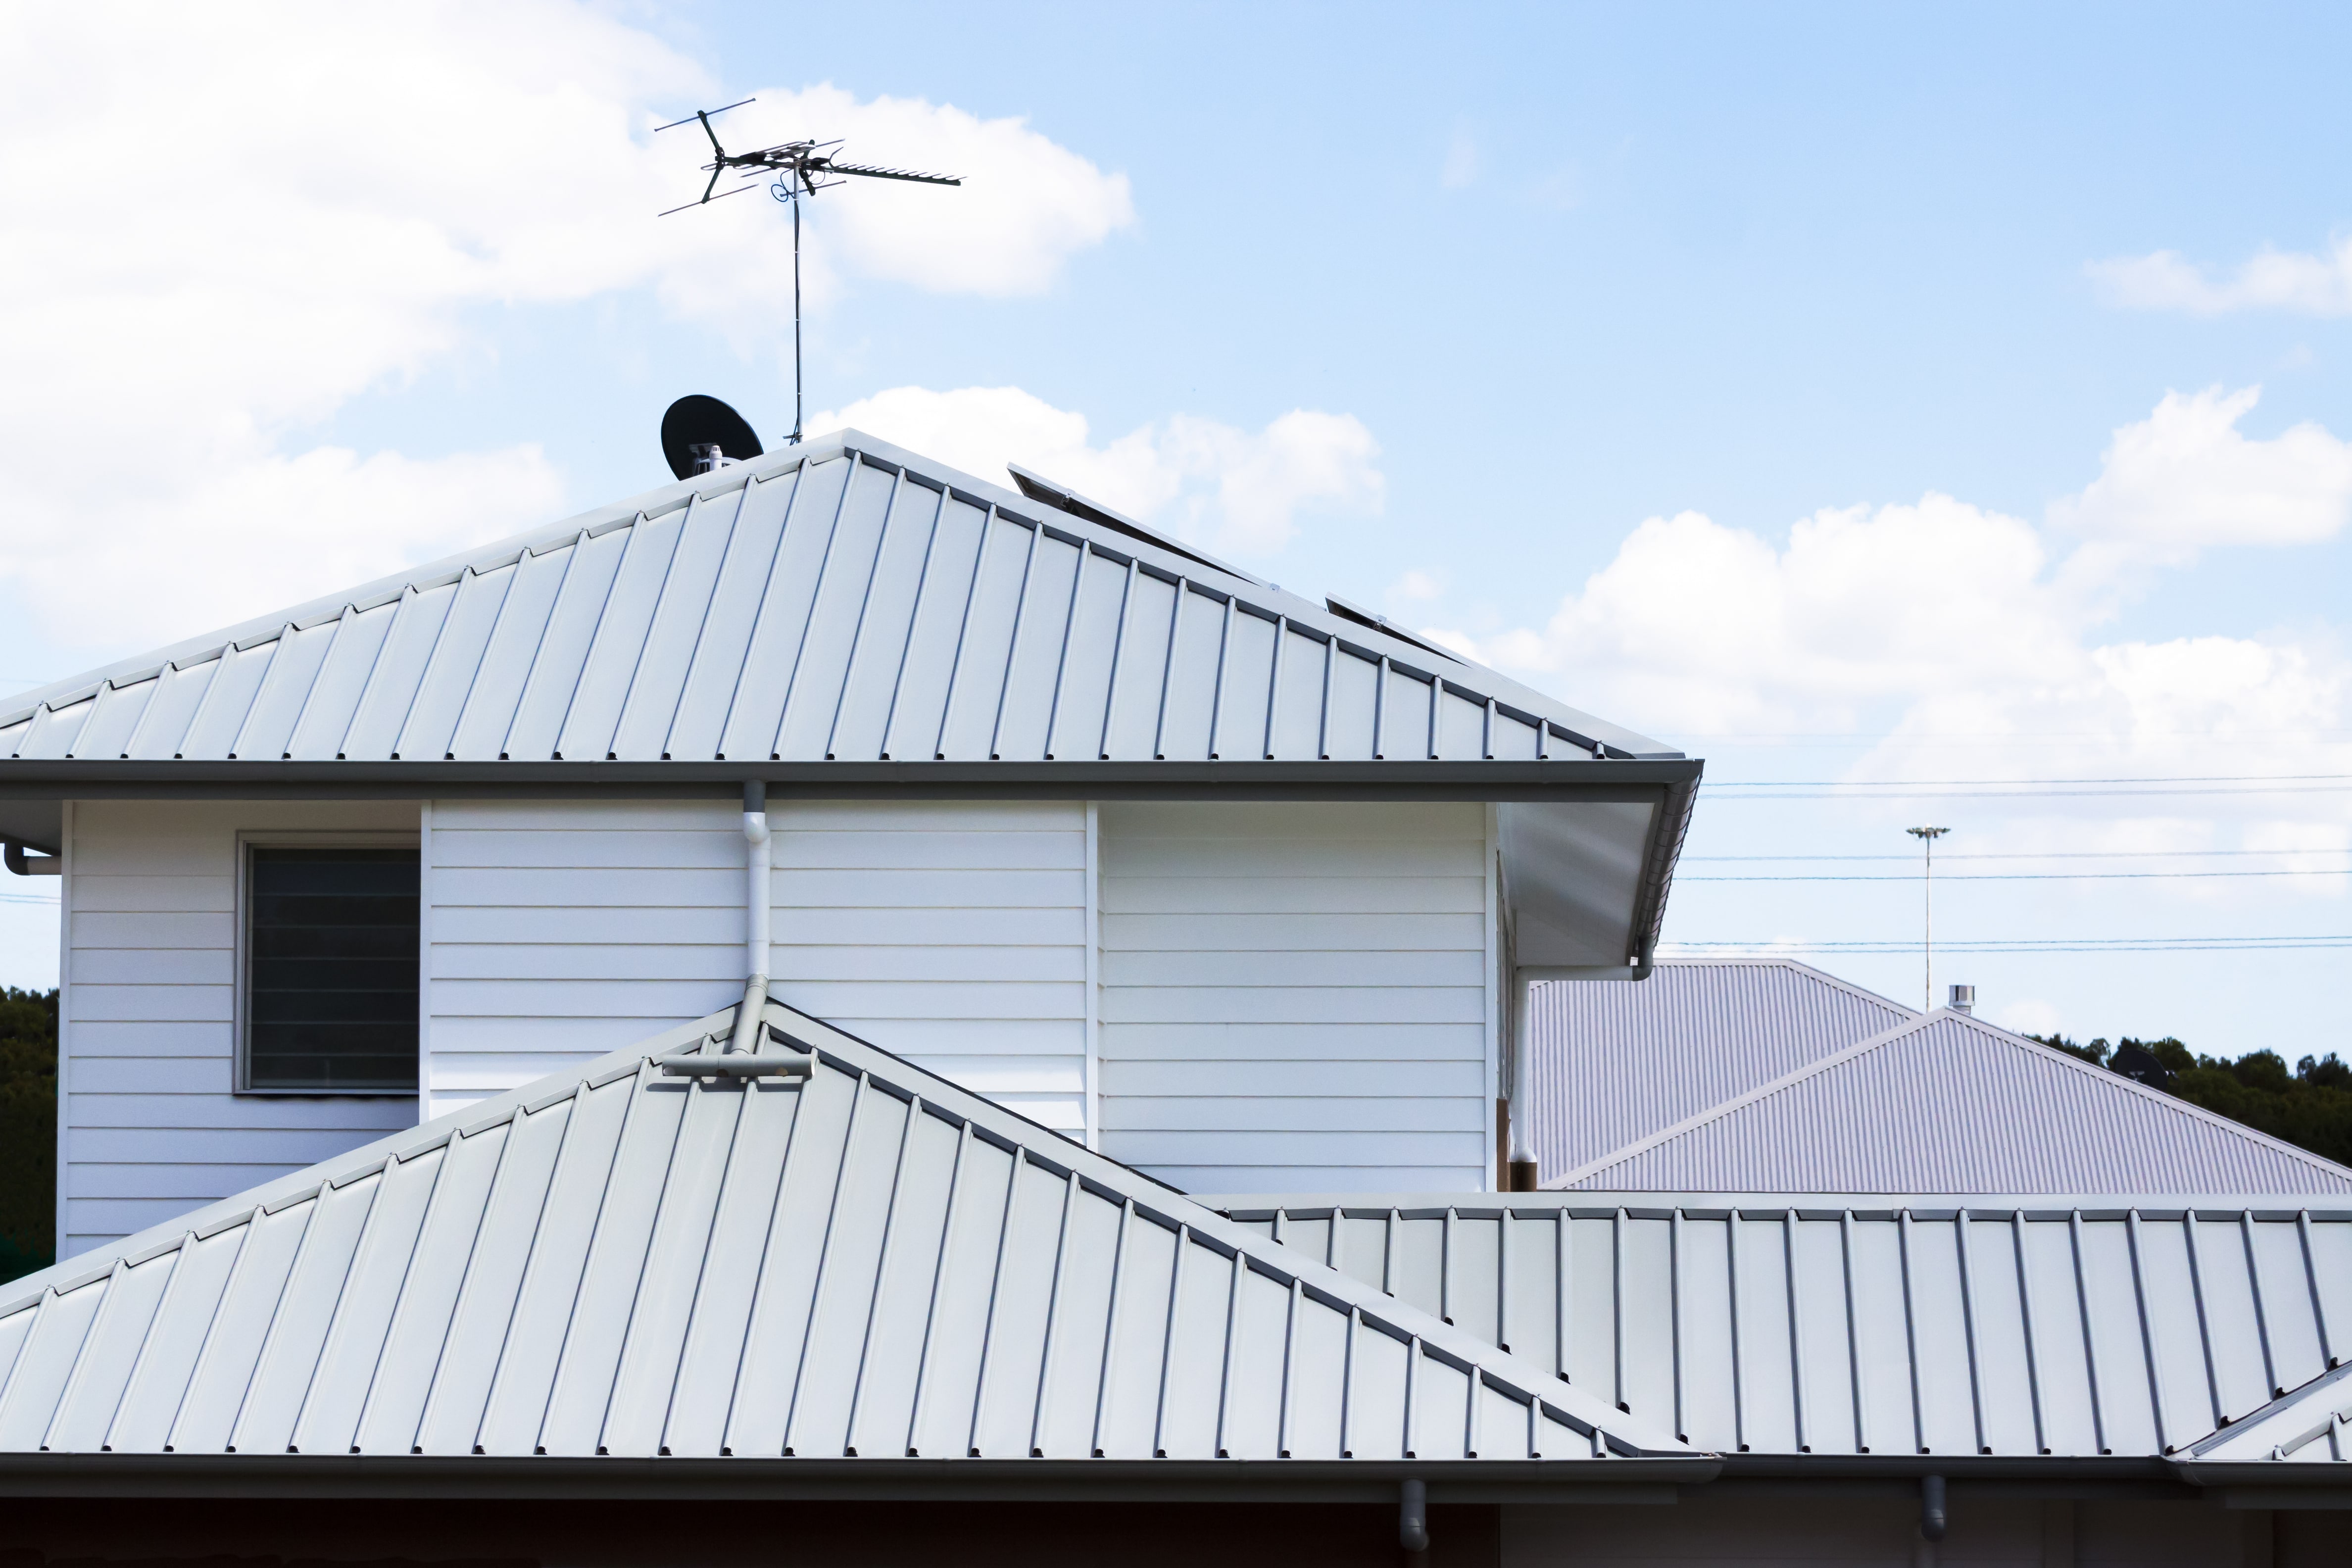 Metal Roofing Styles And Colors - Piedmont Roofing